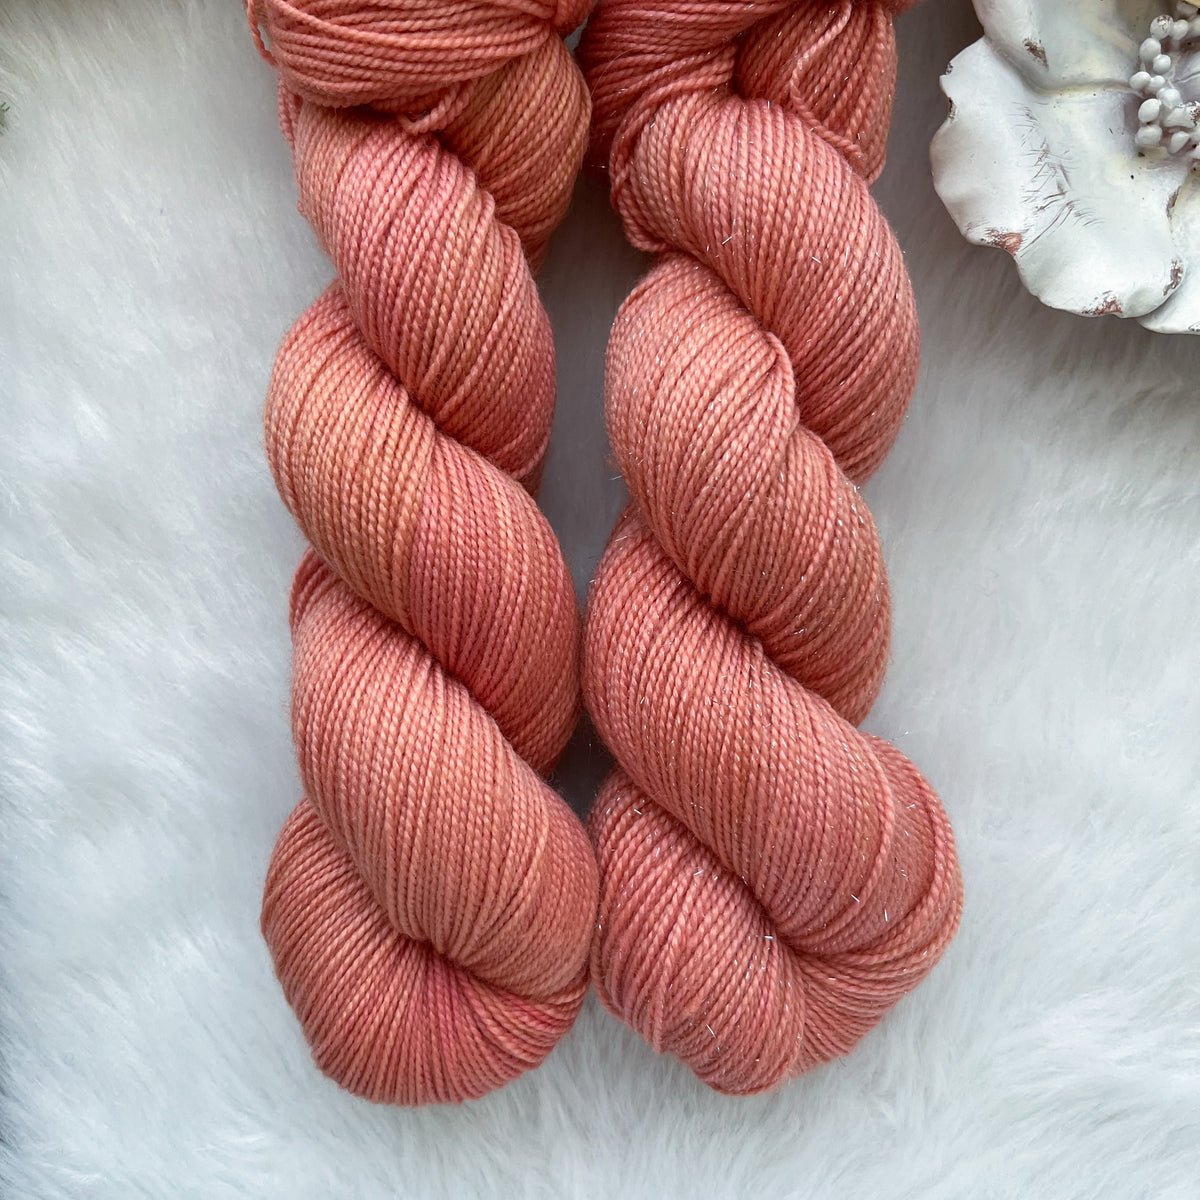 AUTUMN SUNSET SKY - Dyed to Order - Hand Dyed Yarn Skein